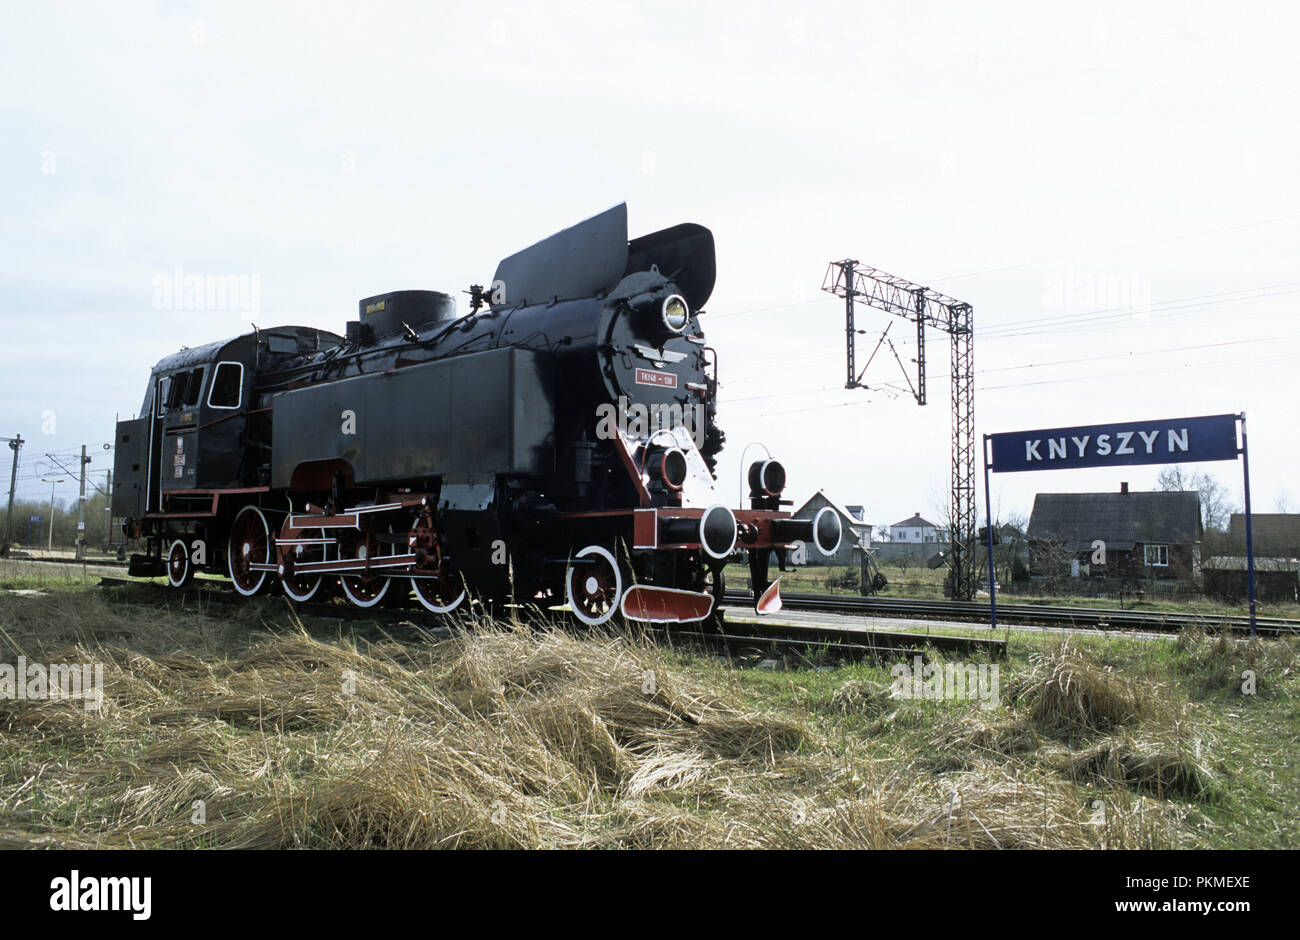 Disused steam locomotive by the train station in town of Knyszyn in Mazury region of Poland May 2008 Stock Photo